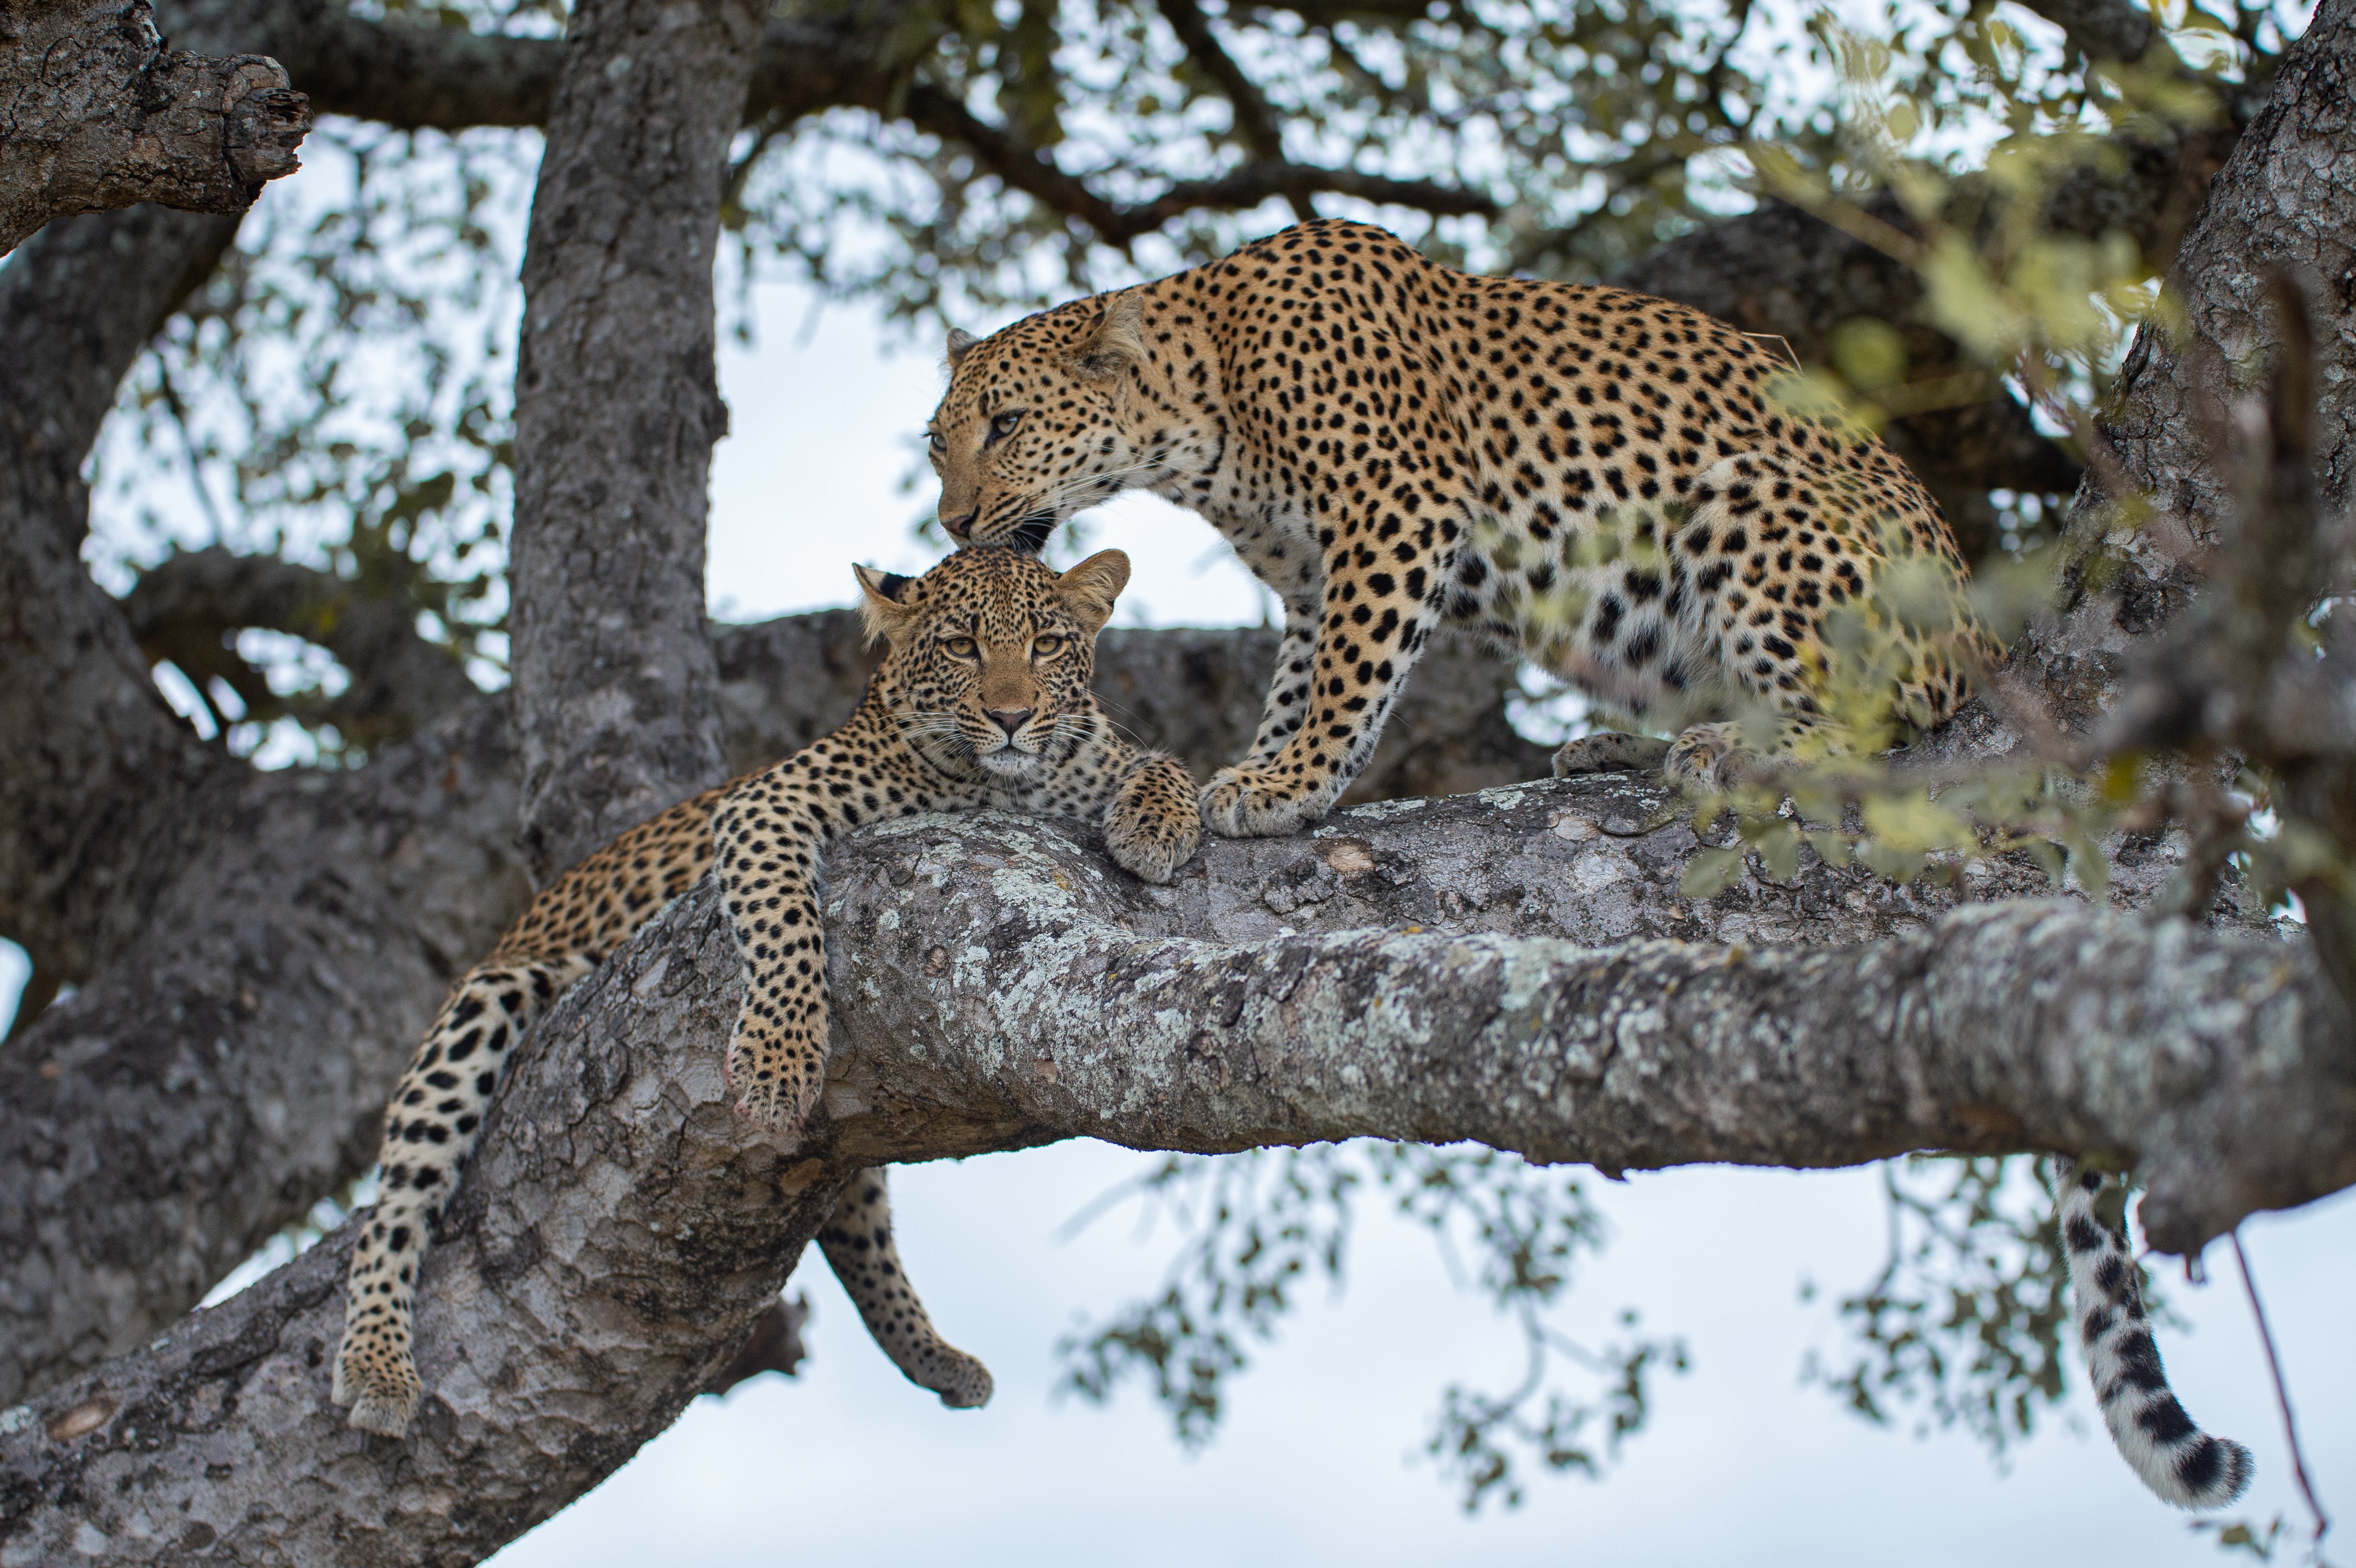 A female leopard and her cub on a tree branch | Photo: Shutterstock